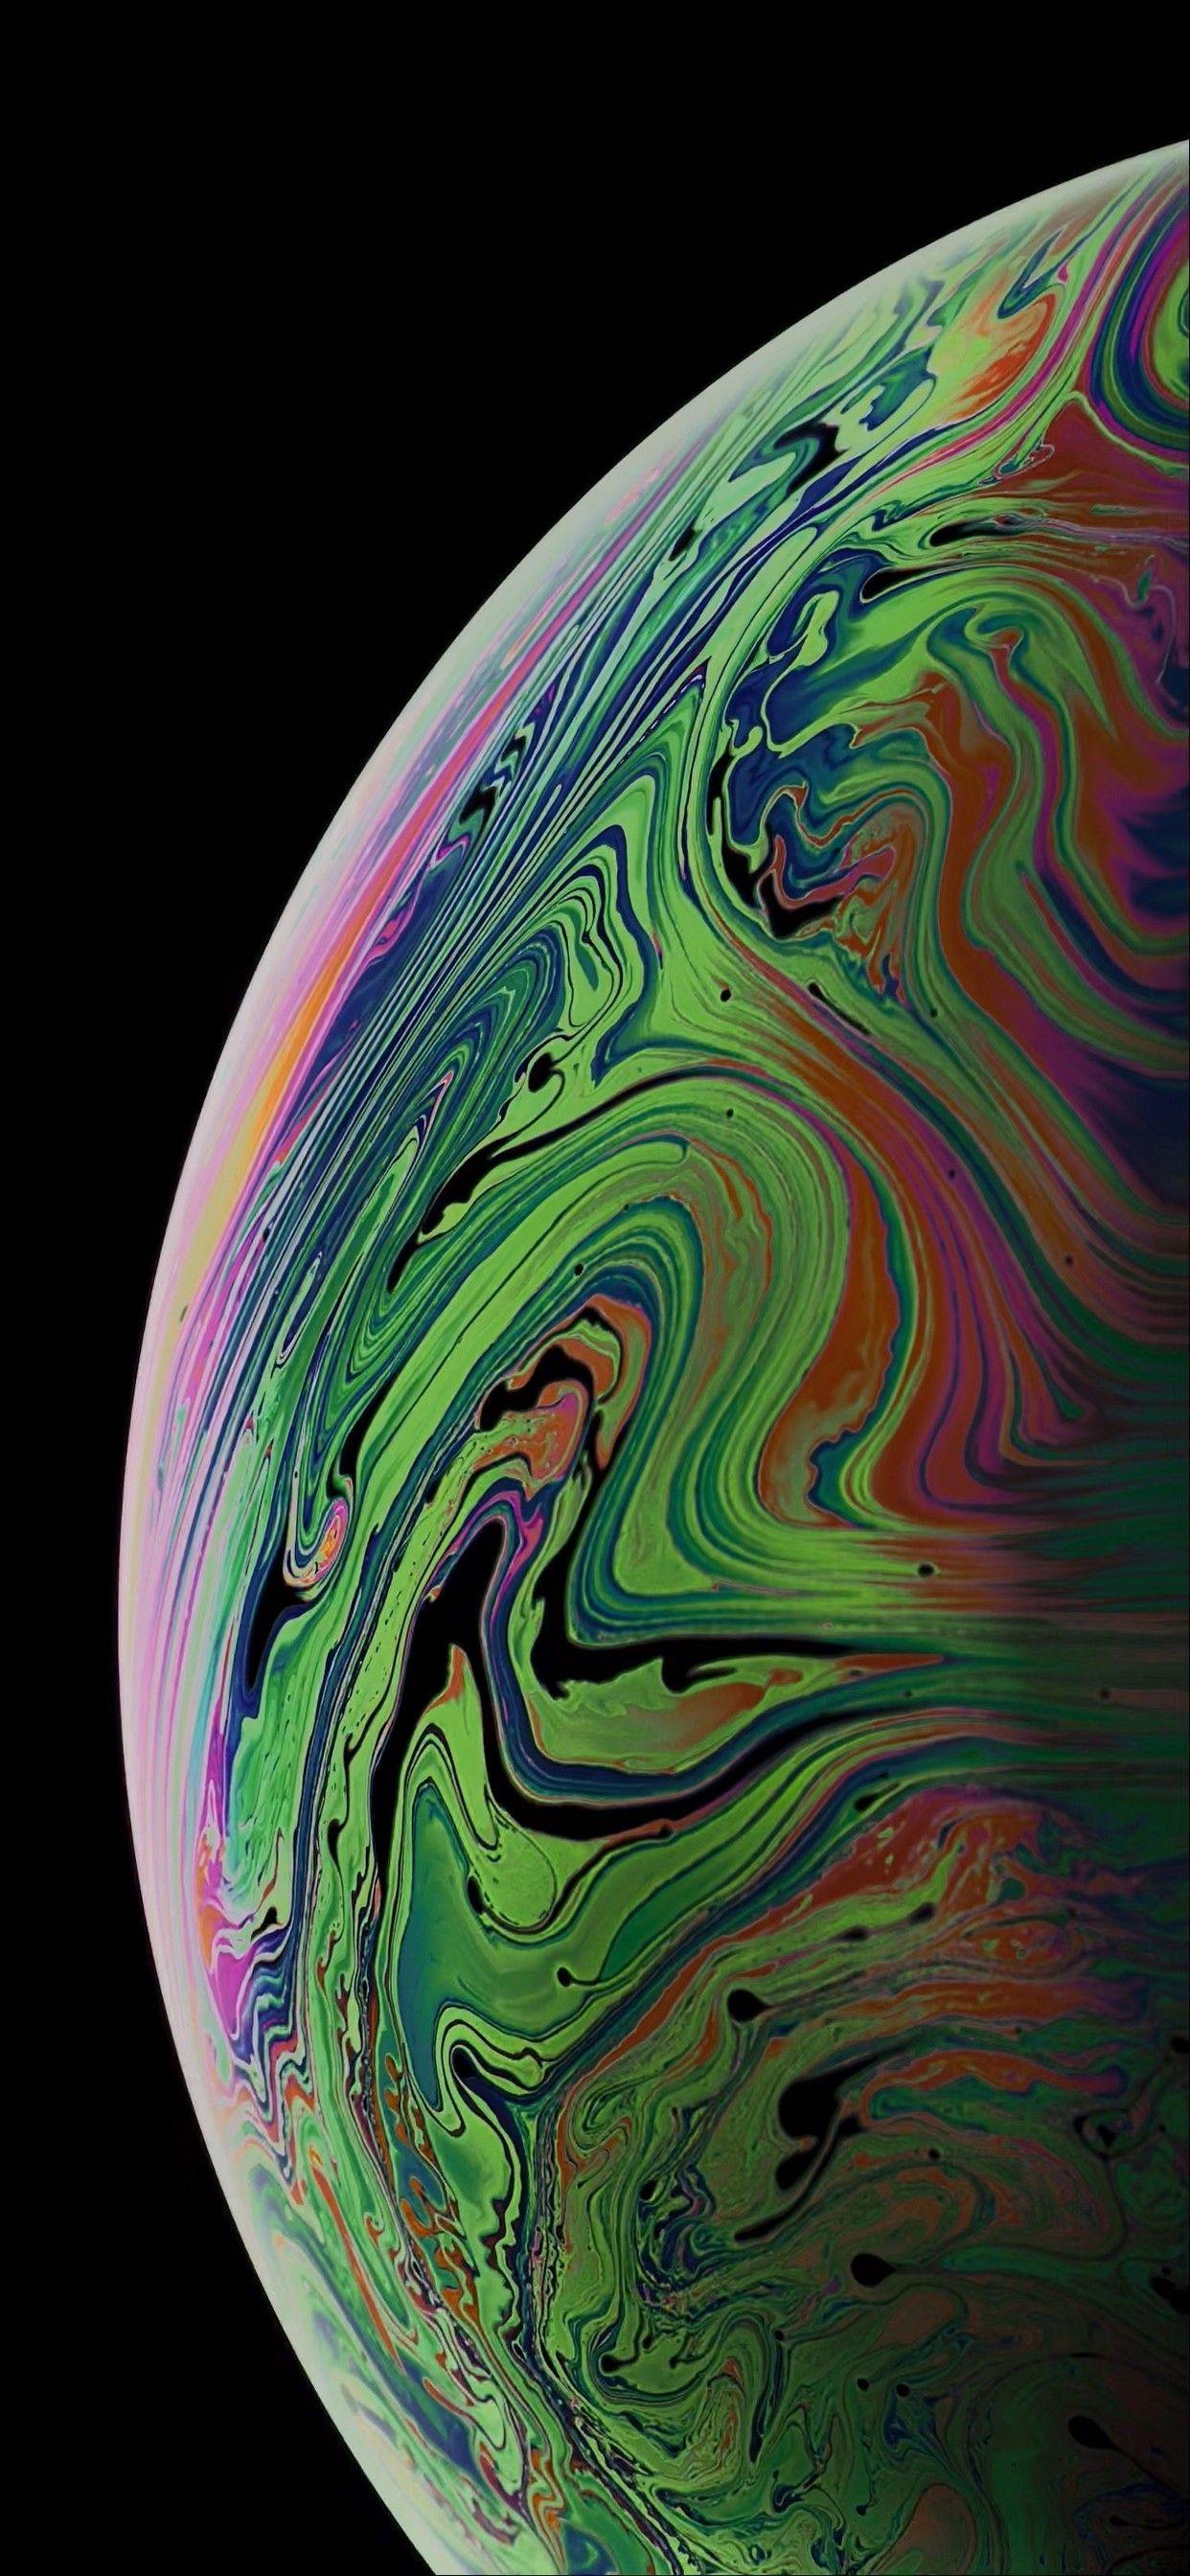 Apple Iphone Xs Max Wallpapers Top Free Apple Iphone Xs Max Backgrounds Wallpaperaccess